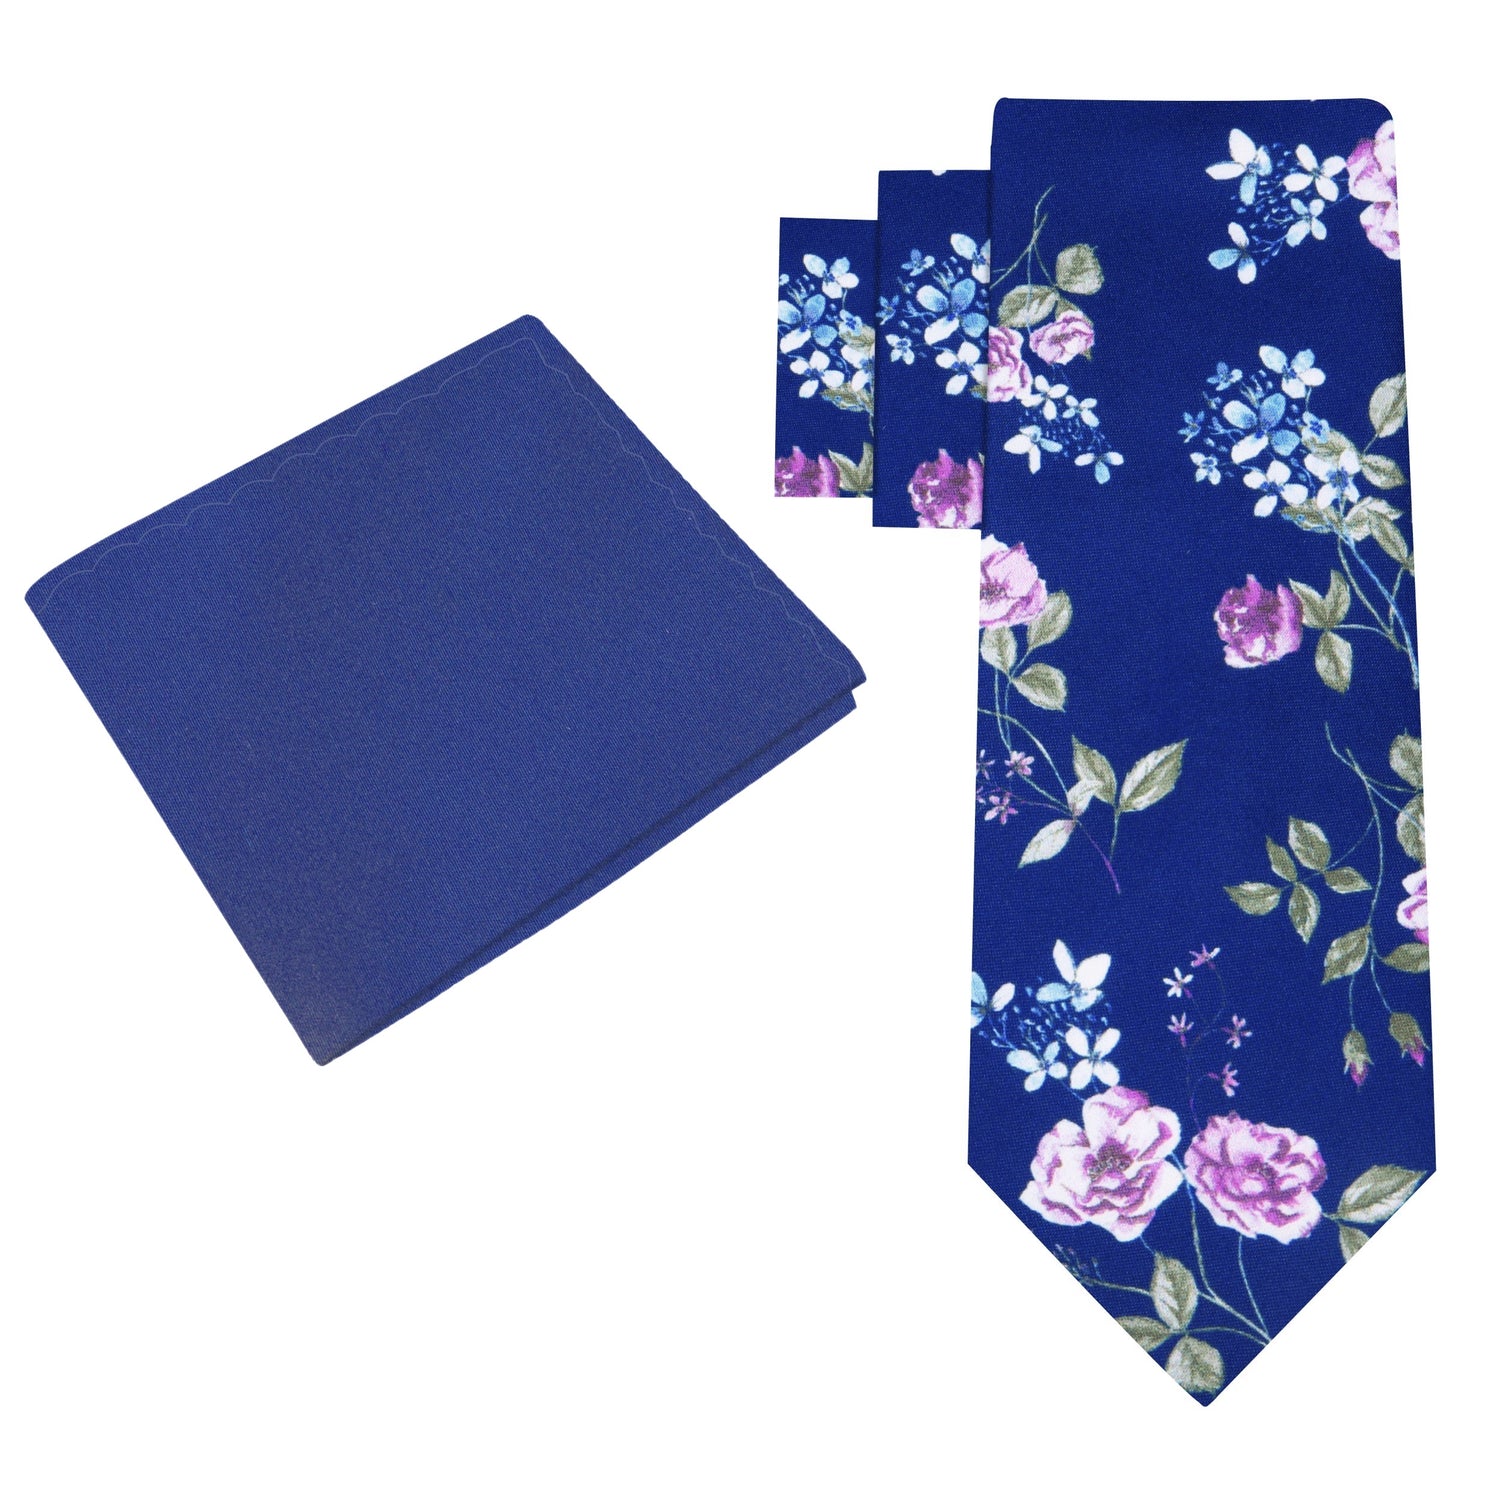 Alt View: Blue, Green, White Flowers Necktie and Blue Square